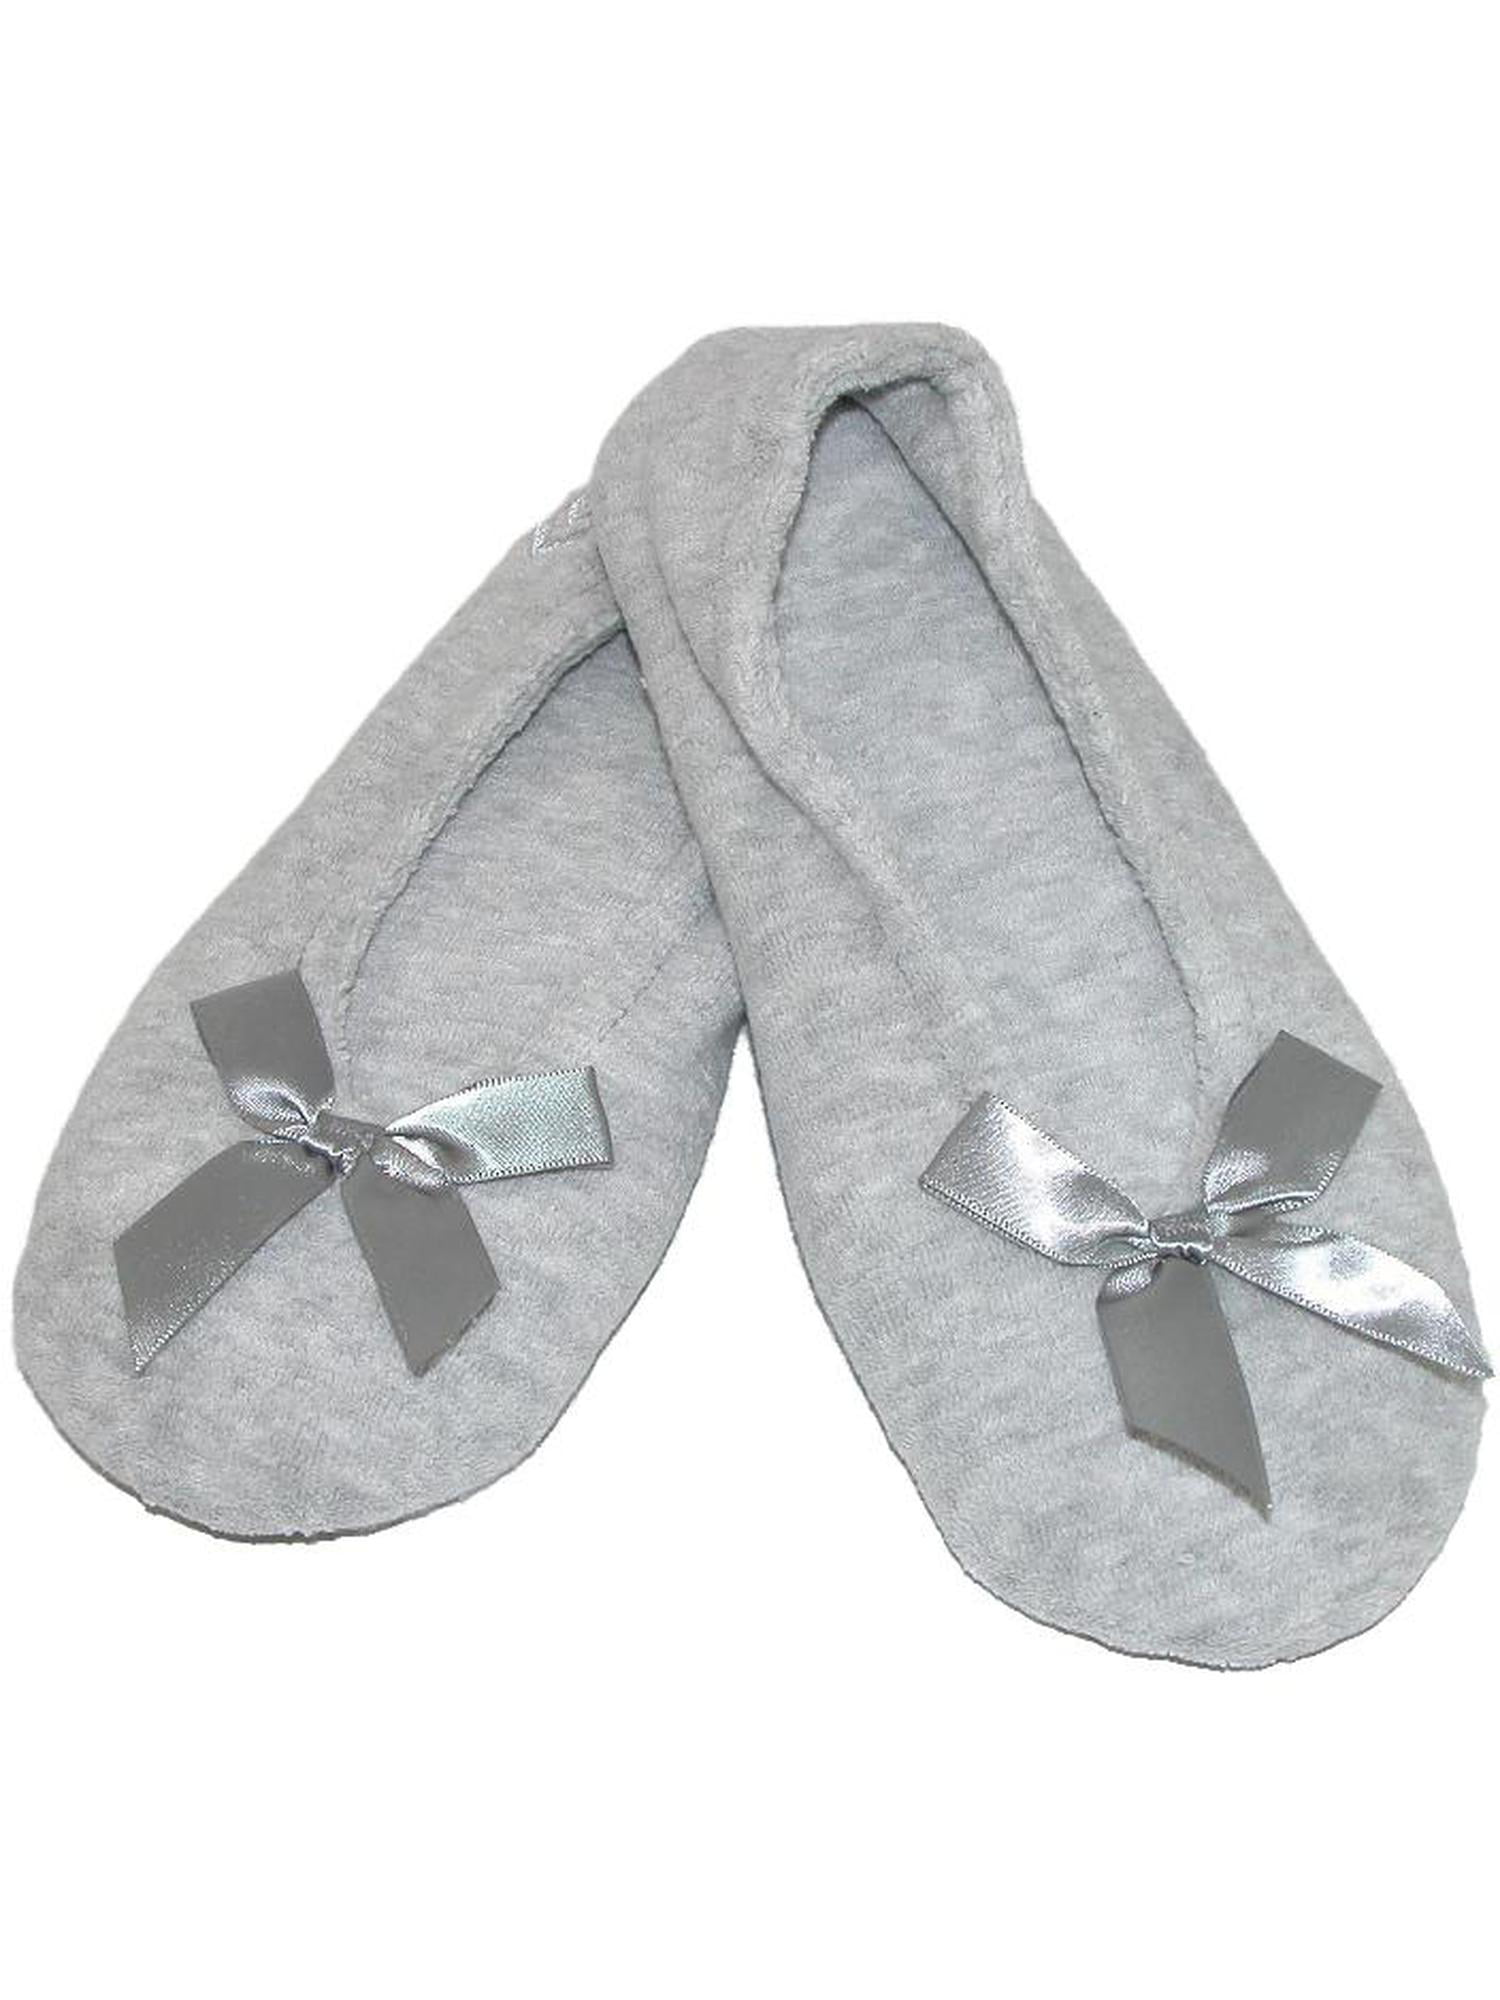 Women's Comfy Cotton Memory Foam Ballerina Slippers Terry Cloth House Shoes